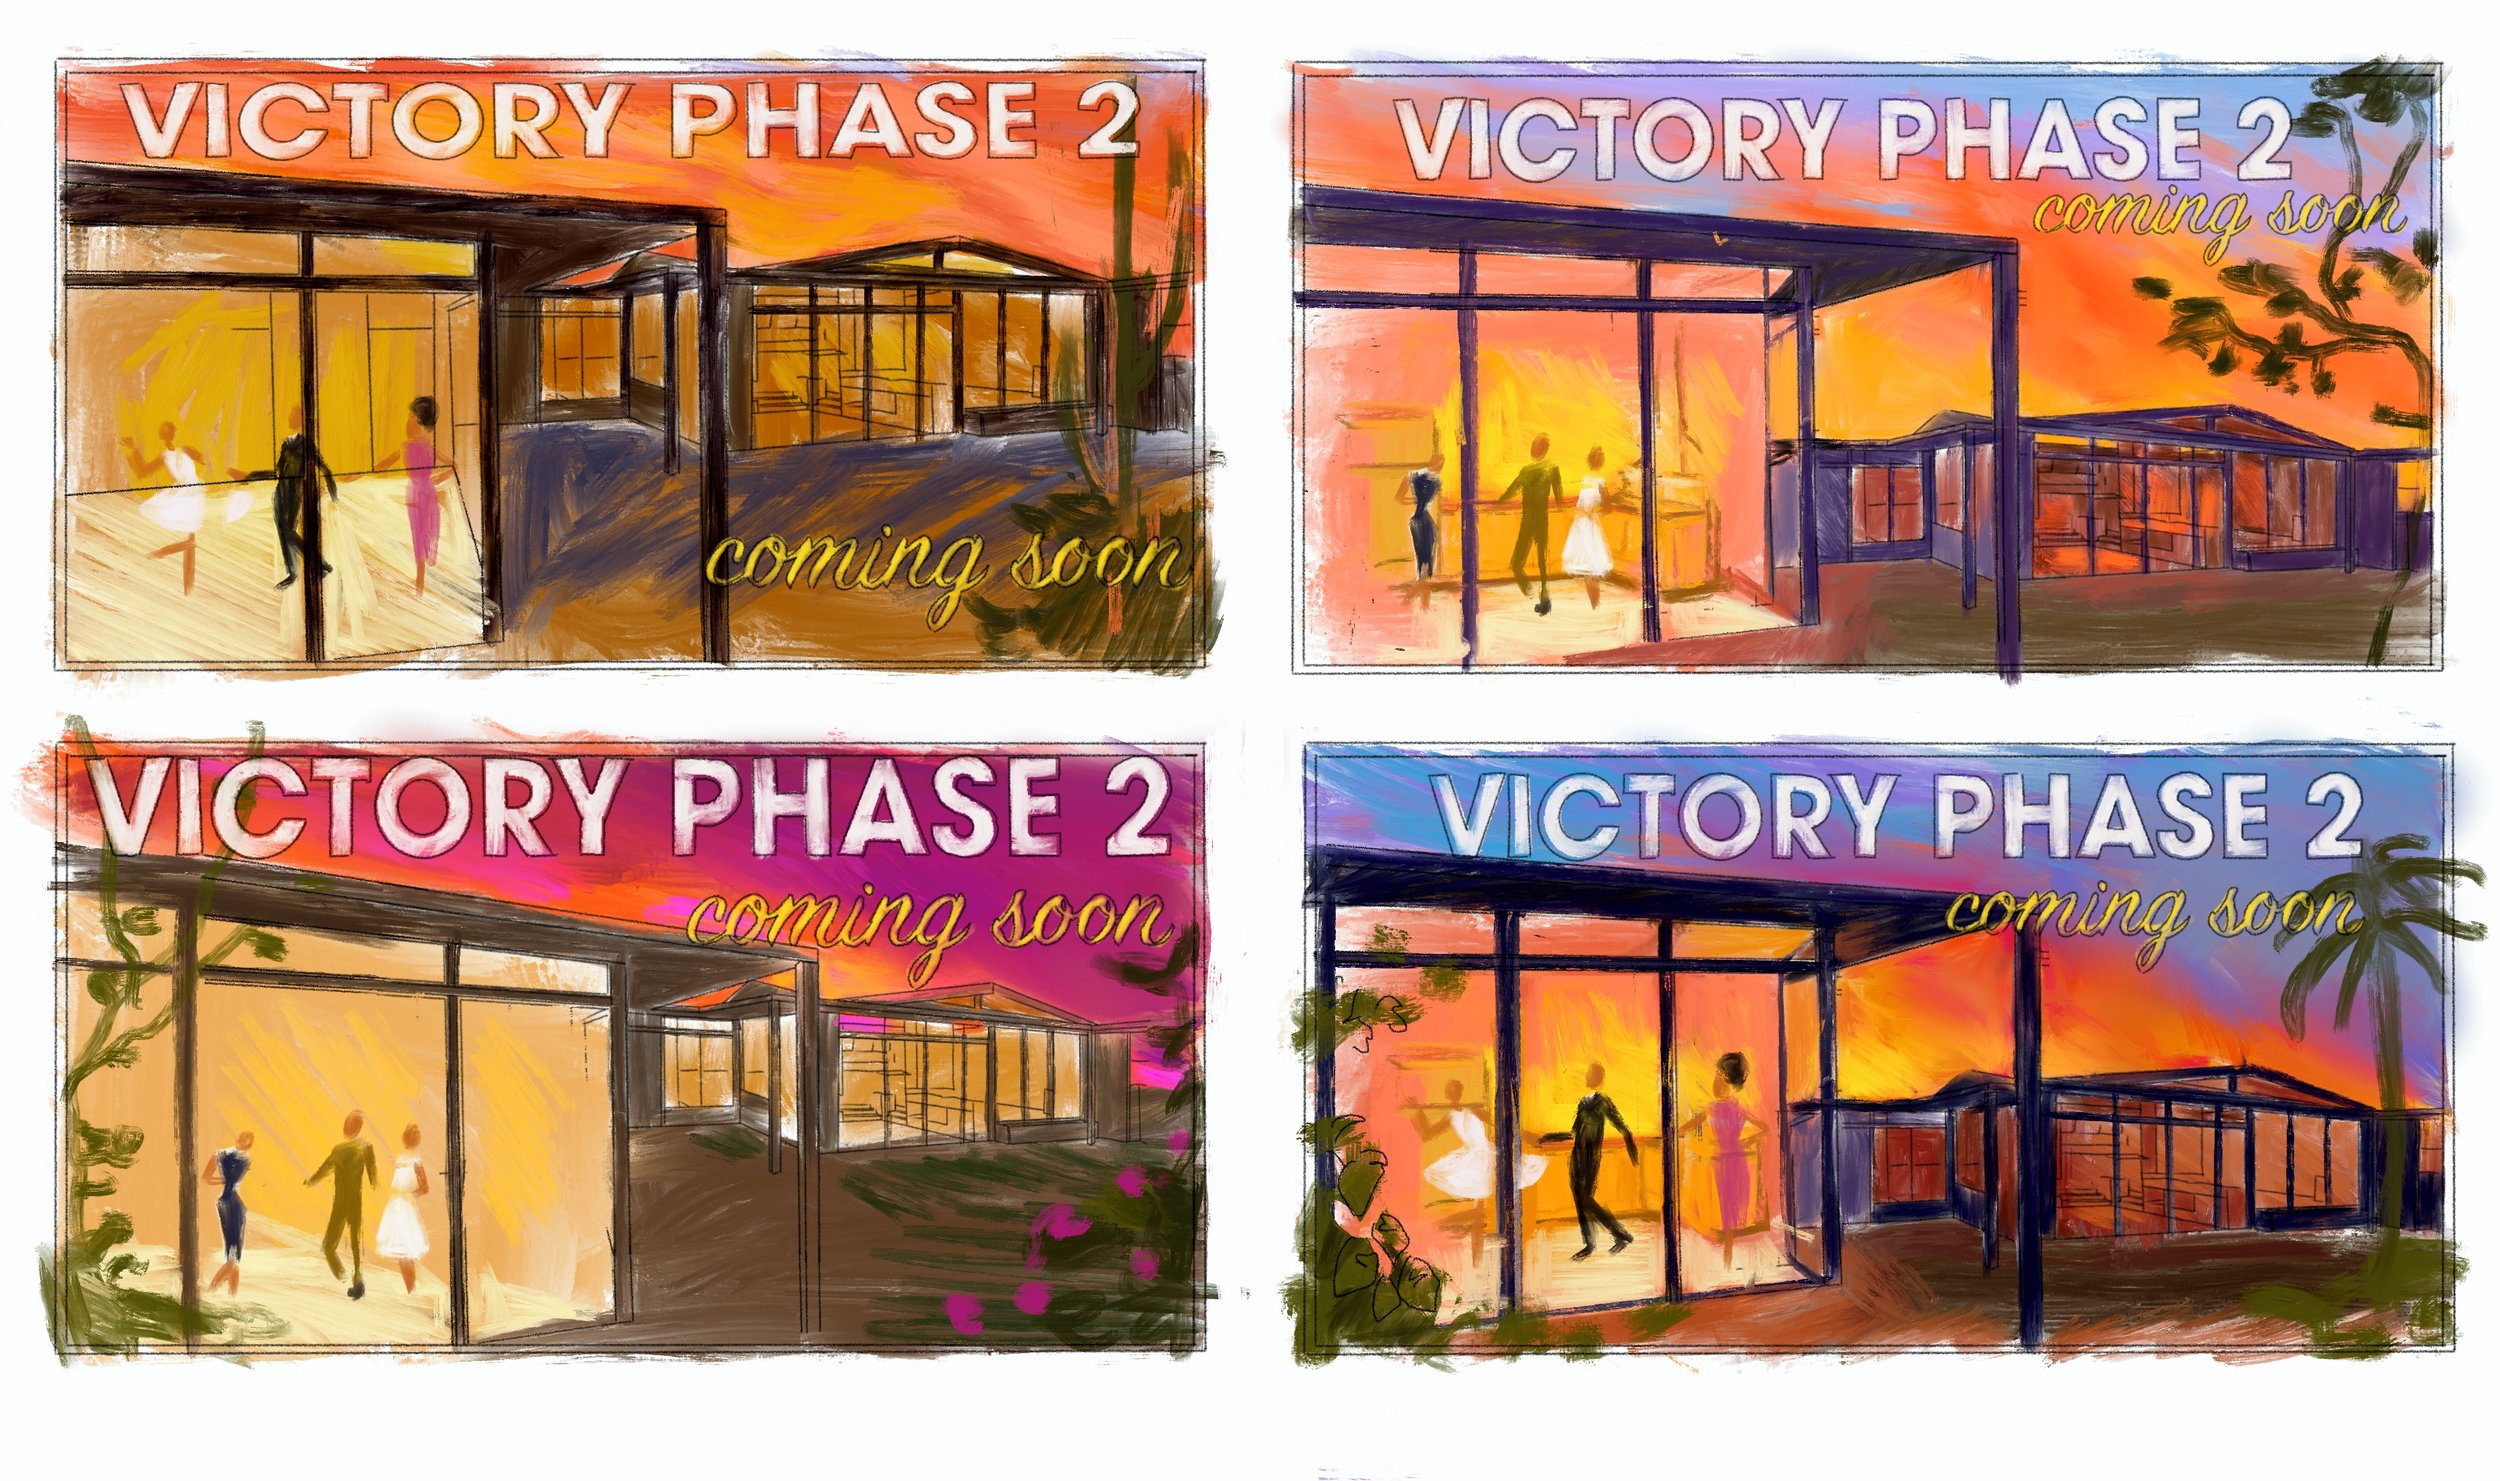 Layout Mockups for Billboard Illustration in "Don't Worry Darling"